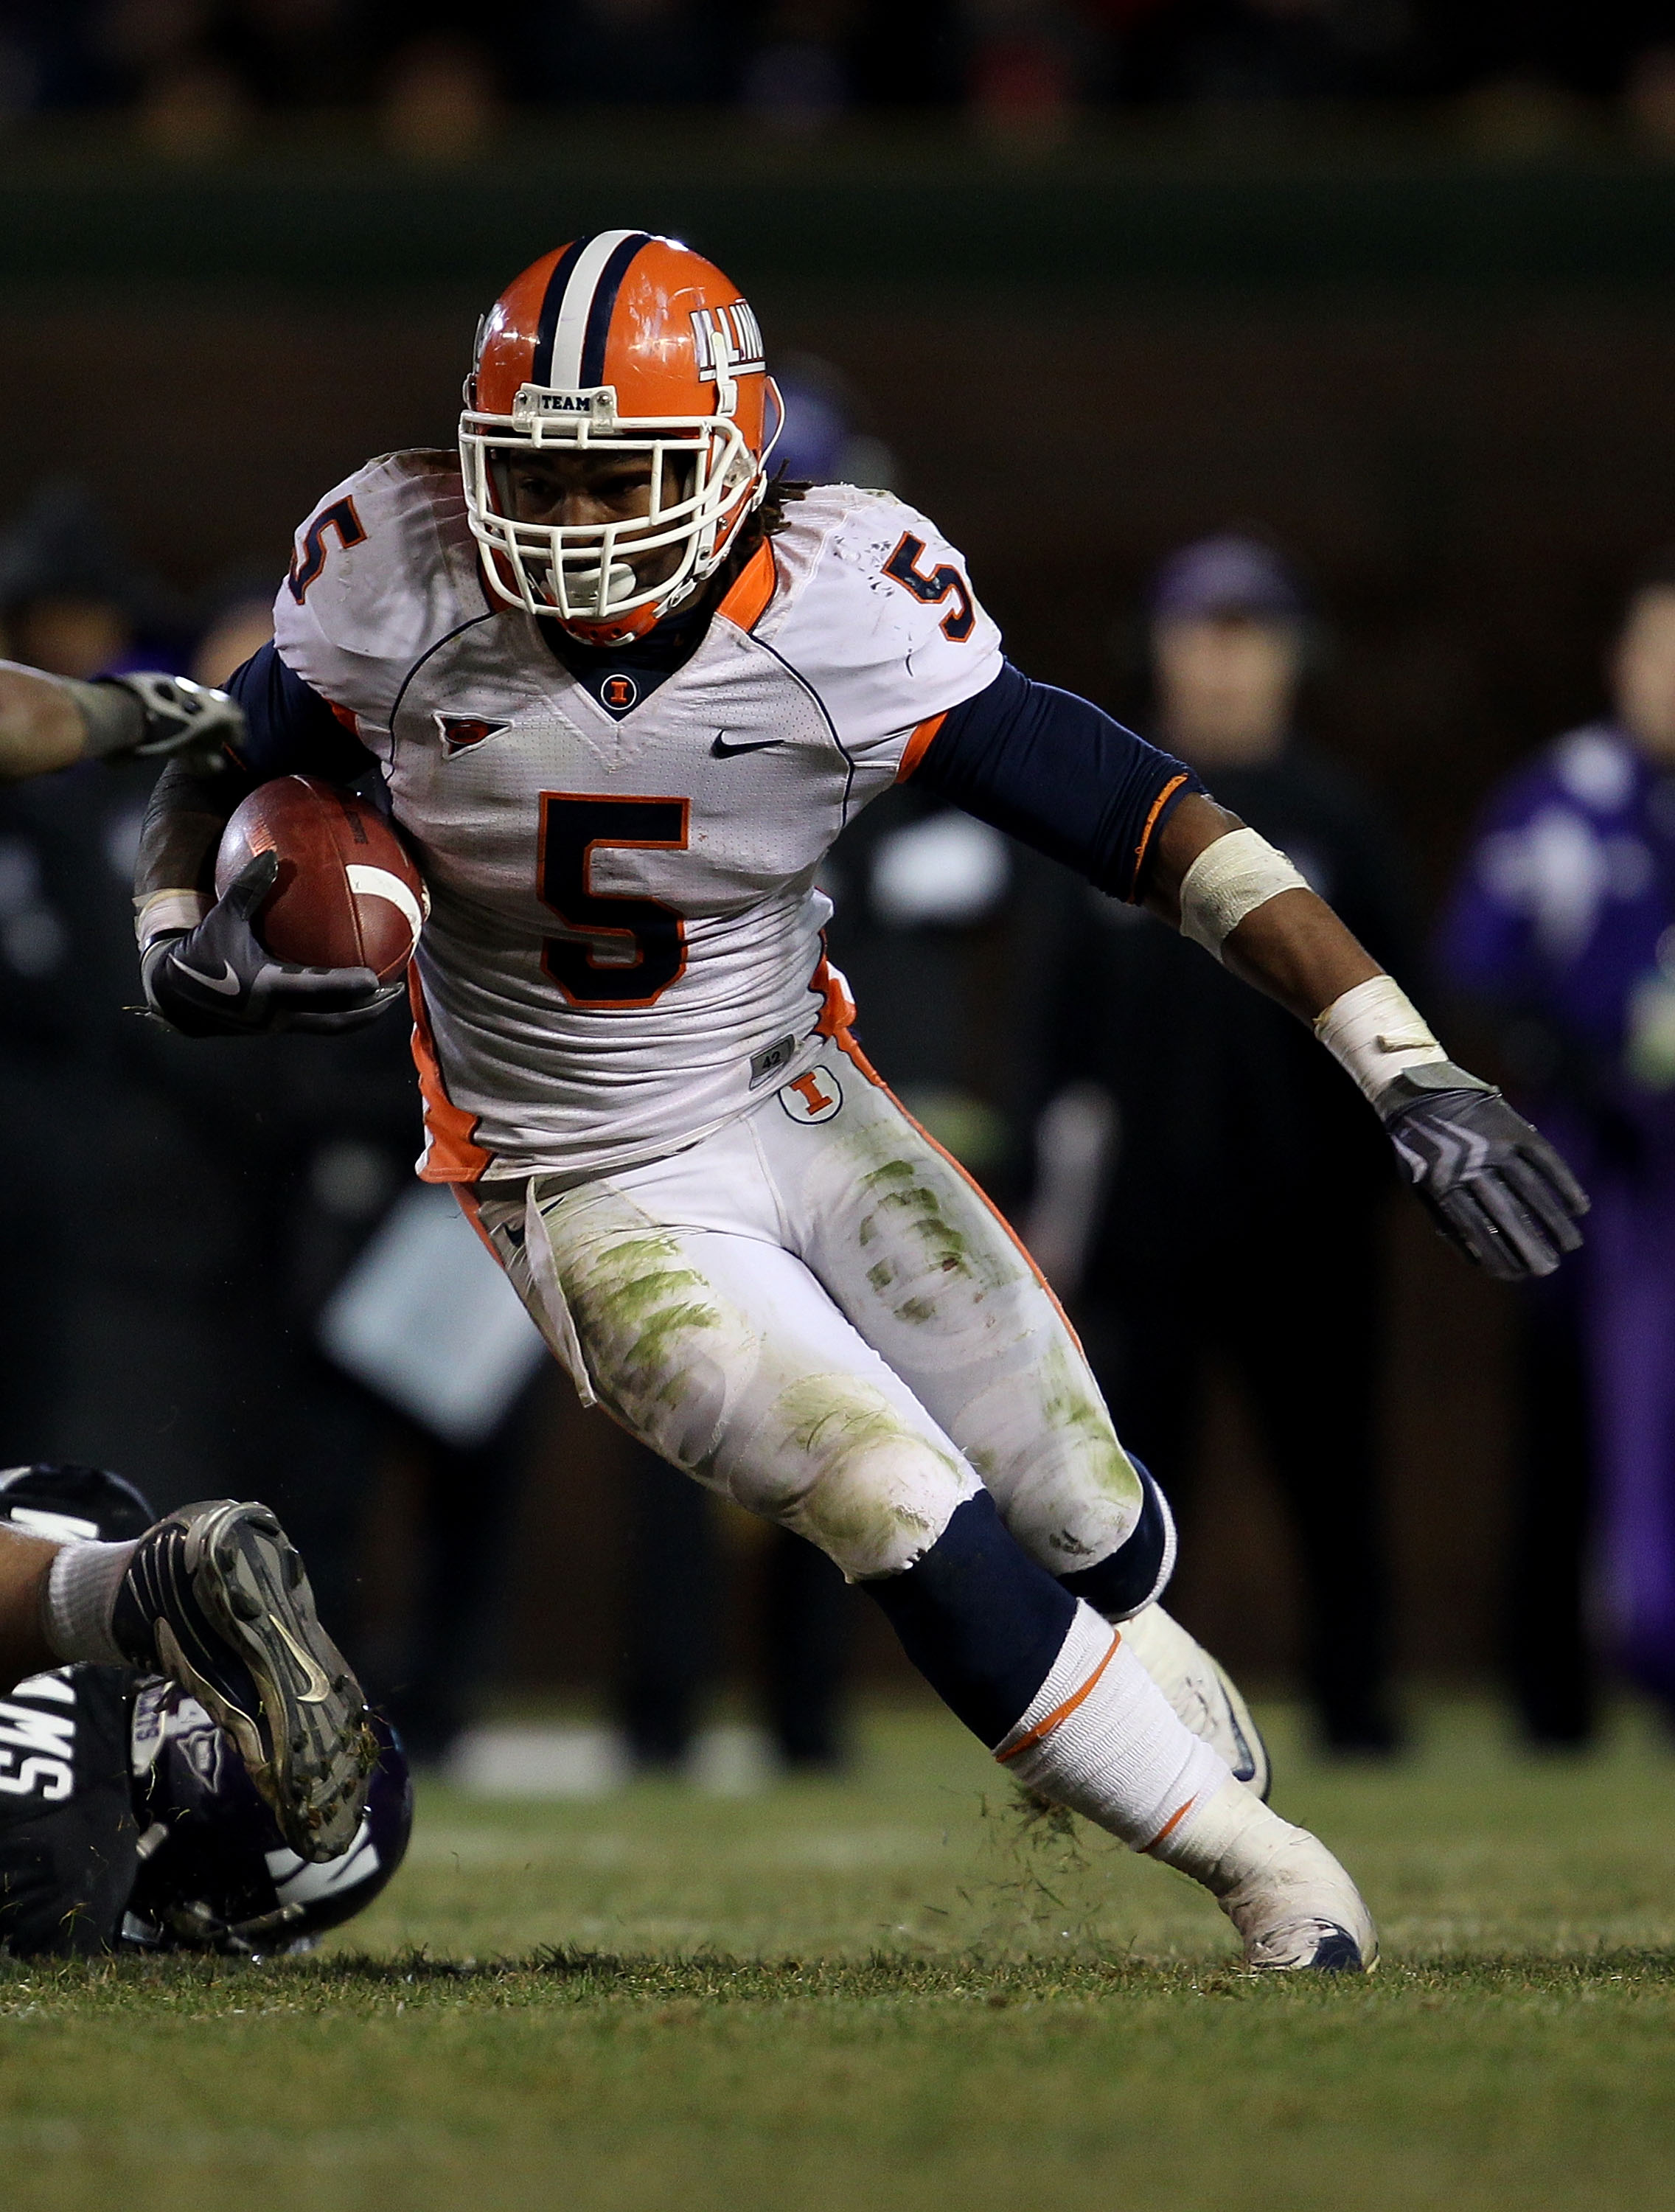 CHICAGO - NOVEMBER 20: Mikel Leshoure #5 of the Illinois Fighting Illini runs on his way to a 339 yard rushing performance against the Northwestern Wildcats during a game played at Wrigley Field on November 20, 2010 in Chicago, Illinois. Illinois defeated